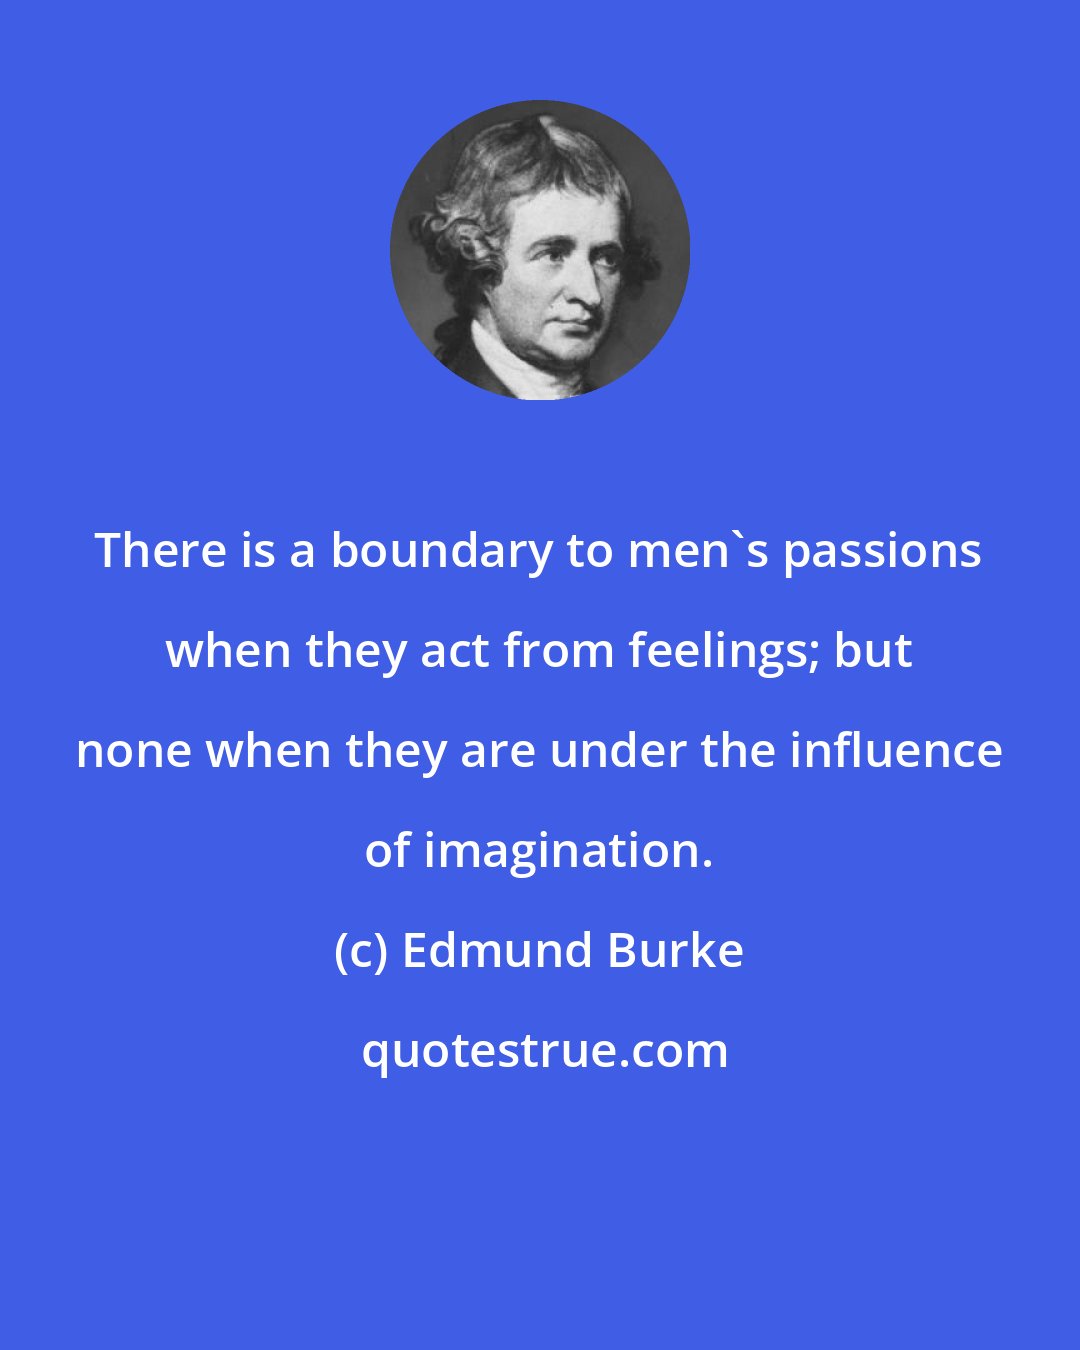 Edmund Burke: There is a boundary to men's passions when they act from feelings; but none when they are under the influence of imagination.